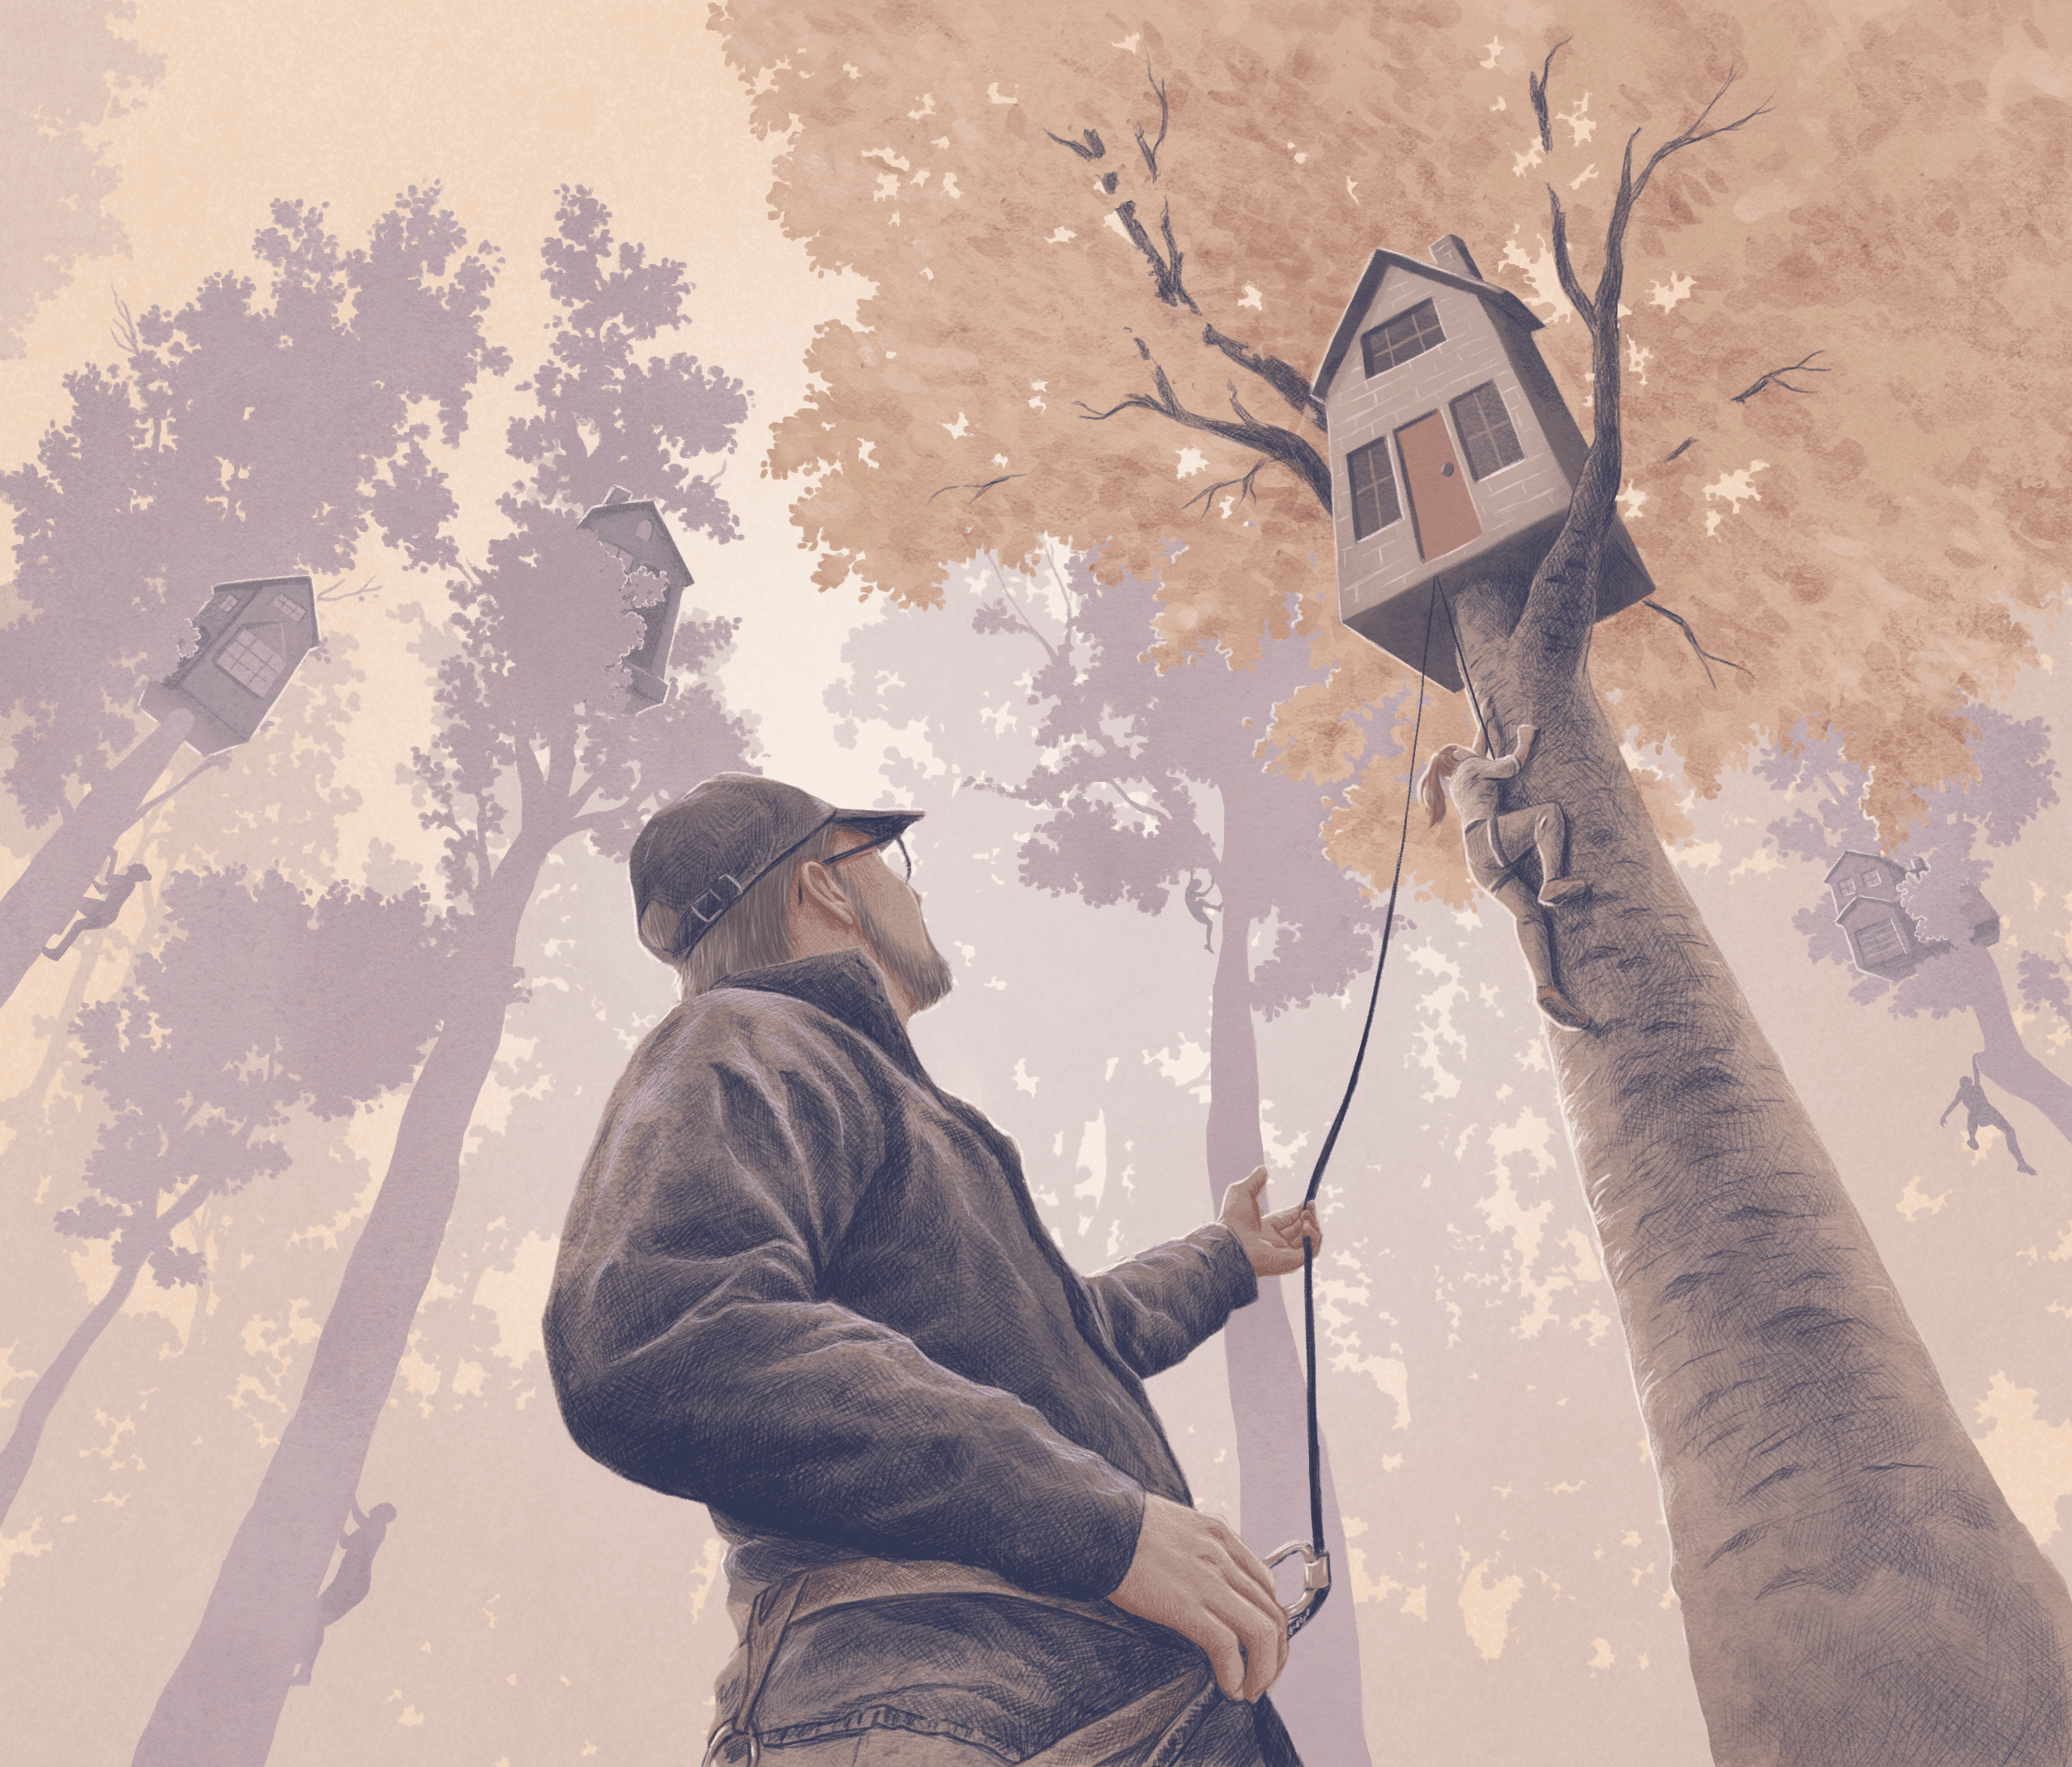 illustration of man by the tree house